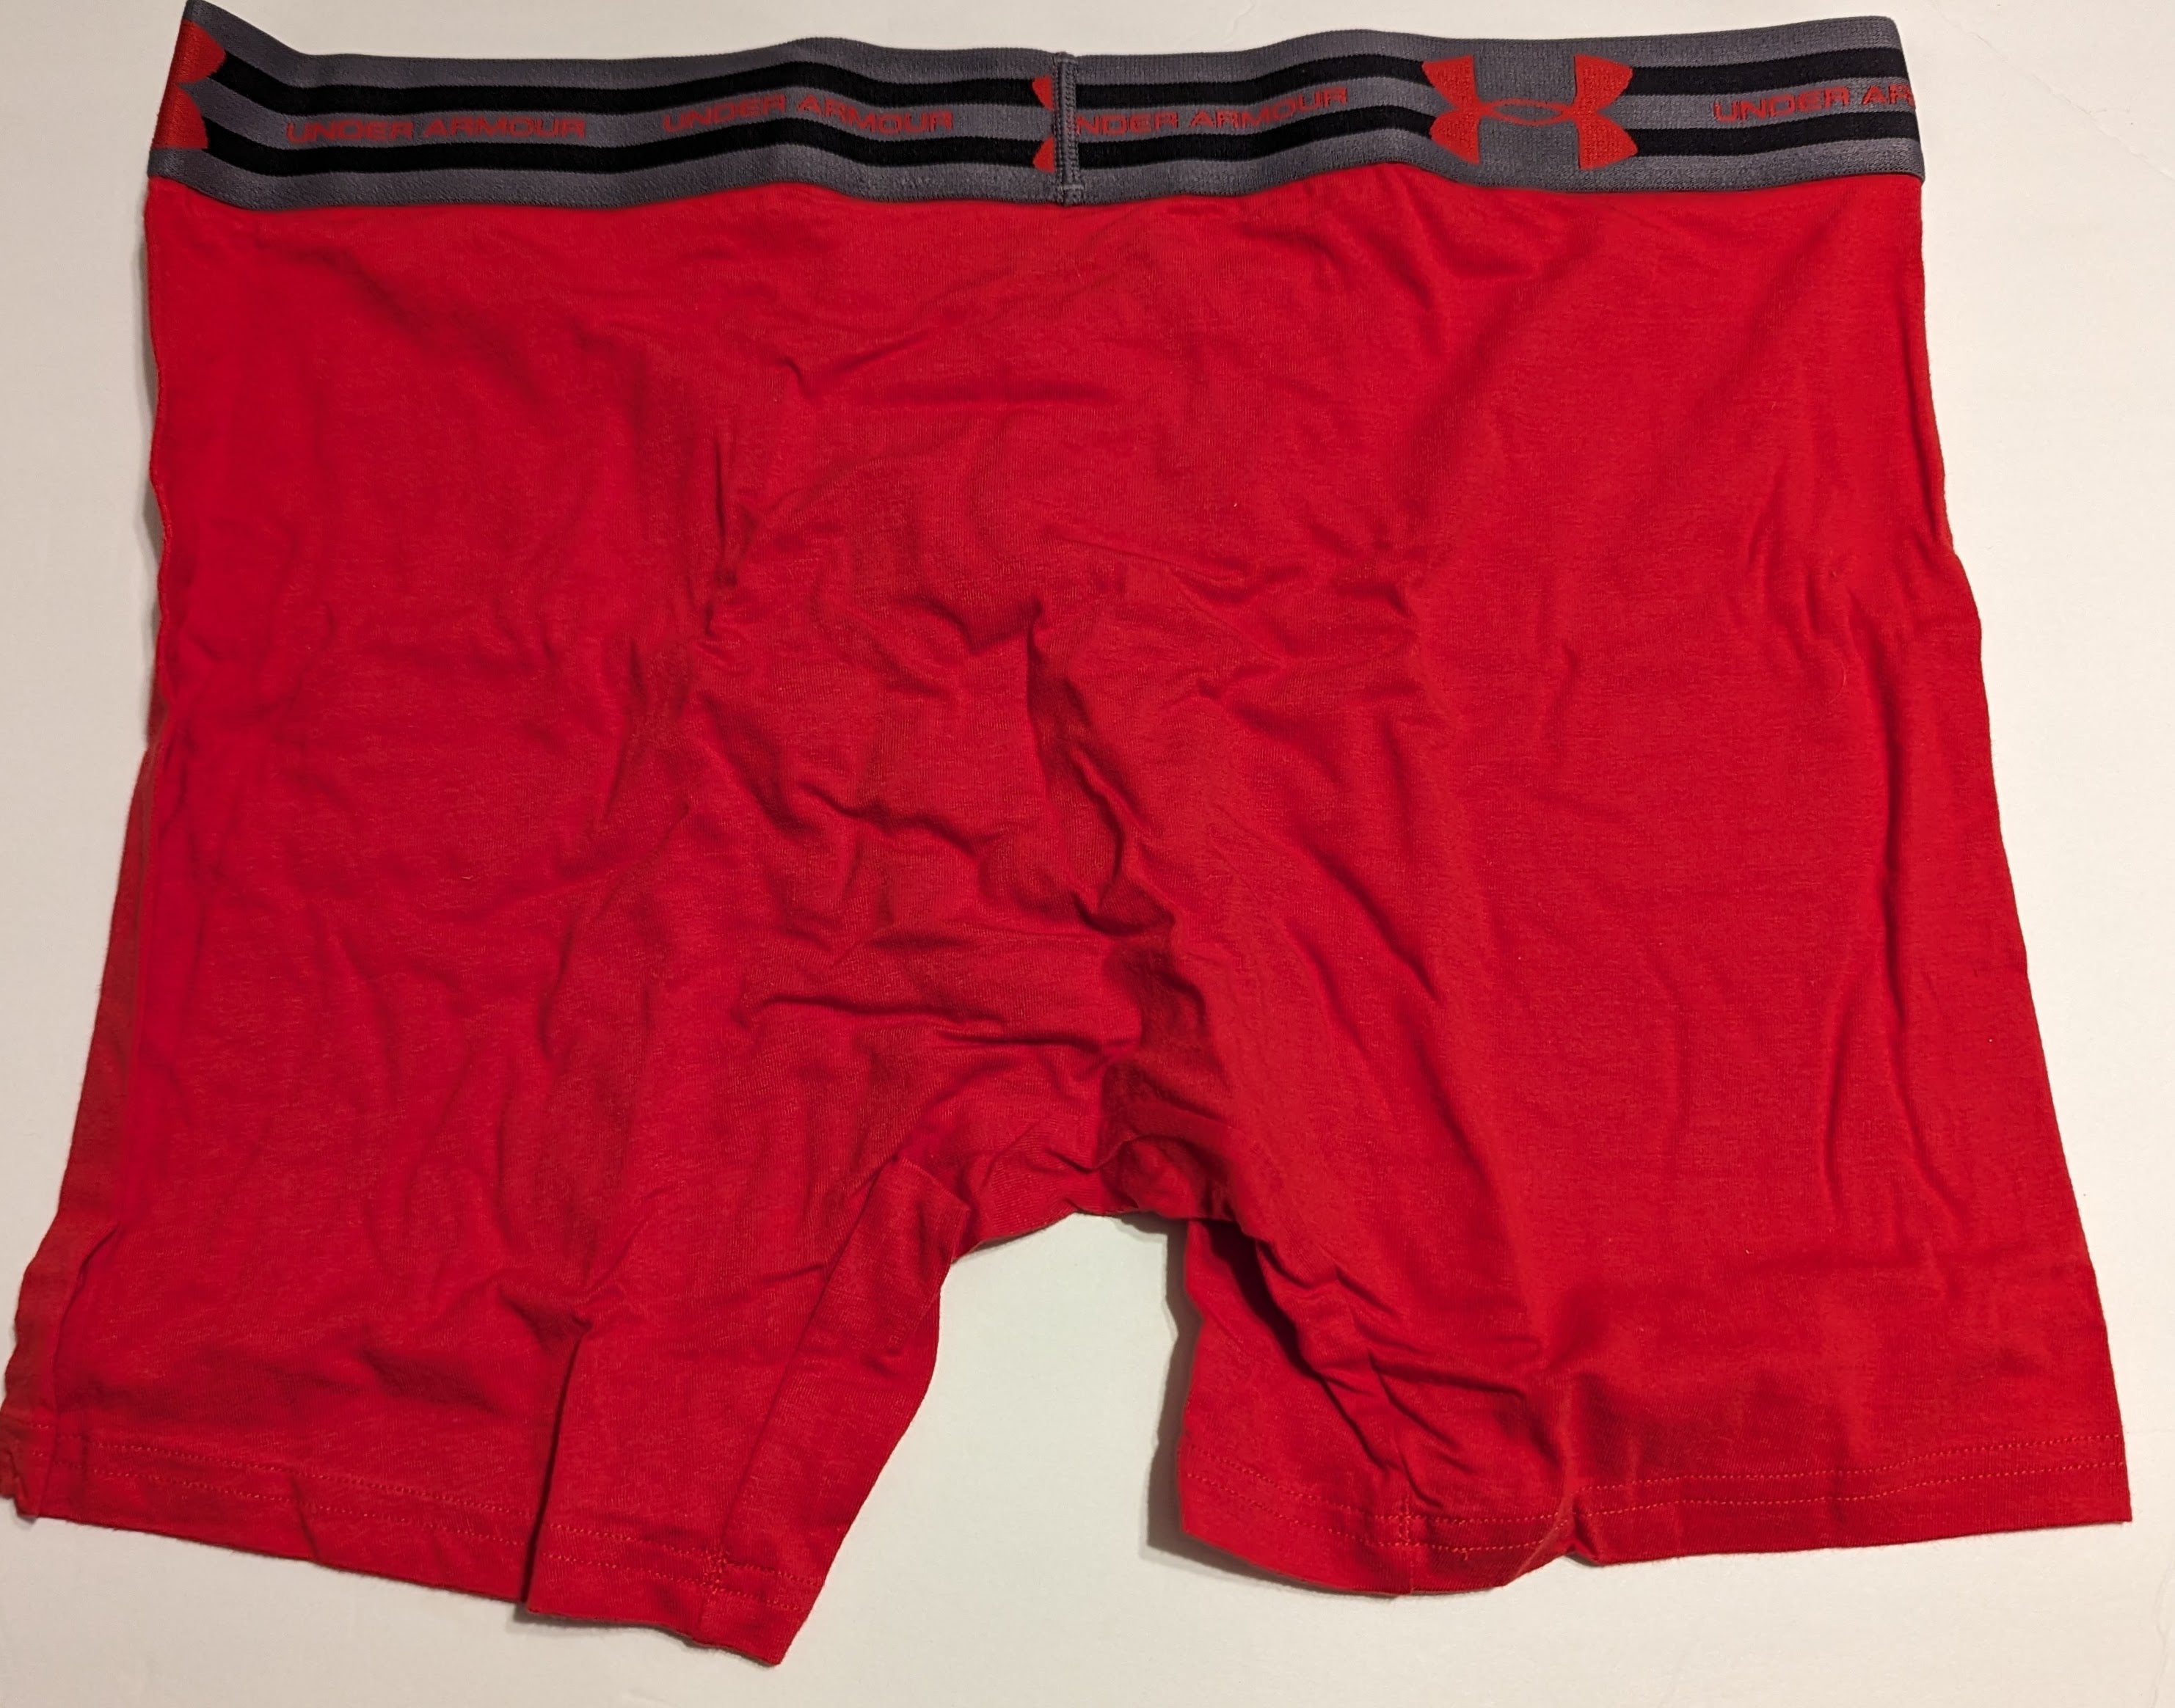 UNDER ARMOUR CHARGED COTTON BOXERJOCK BRIEF